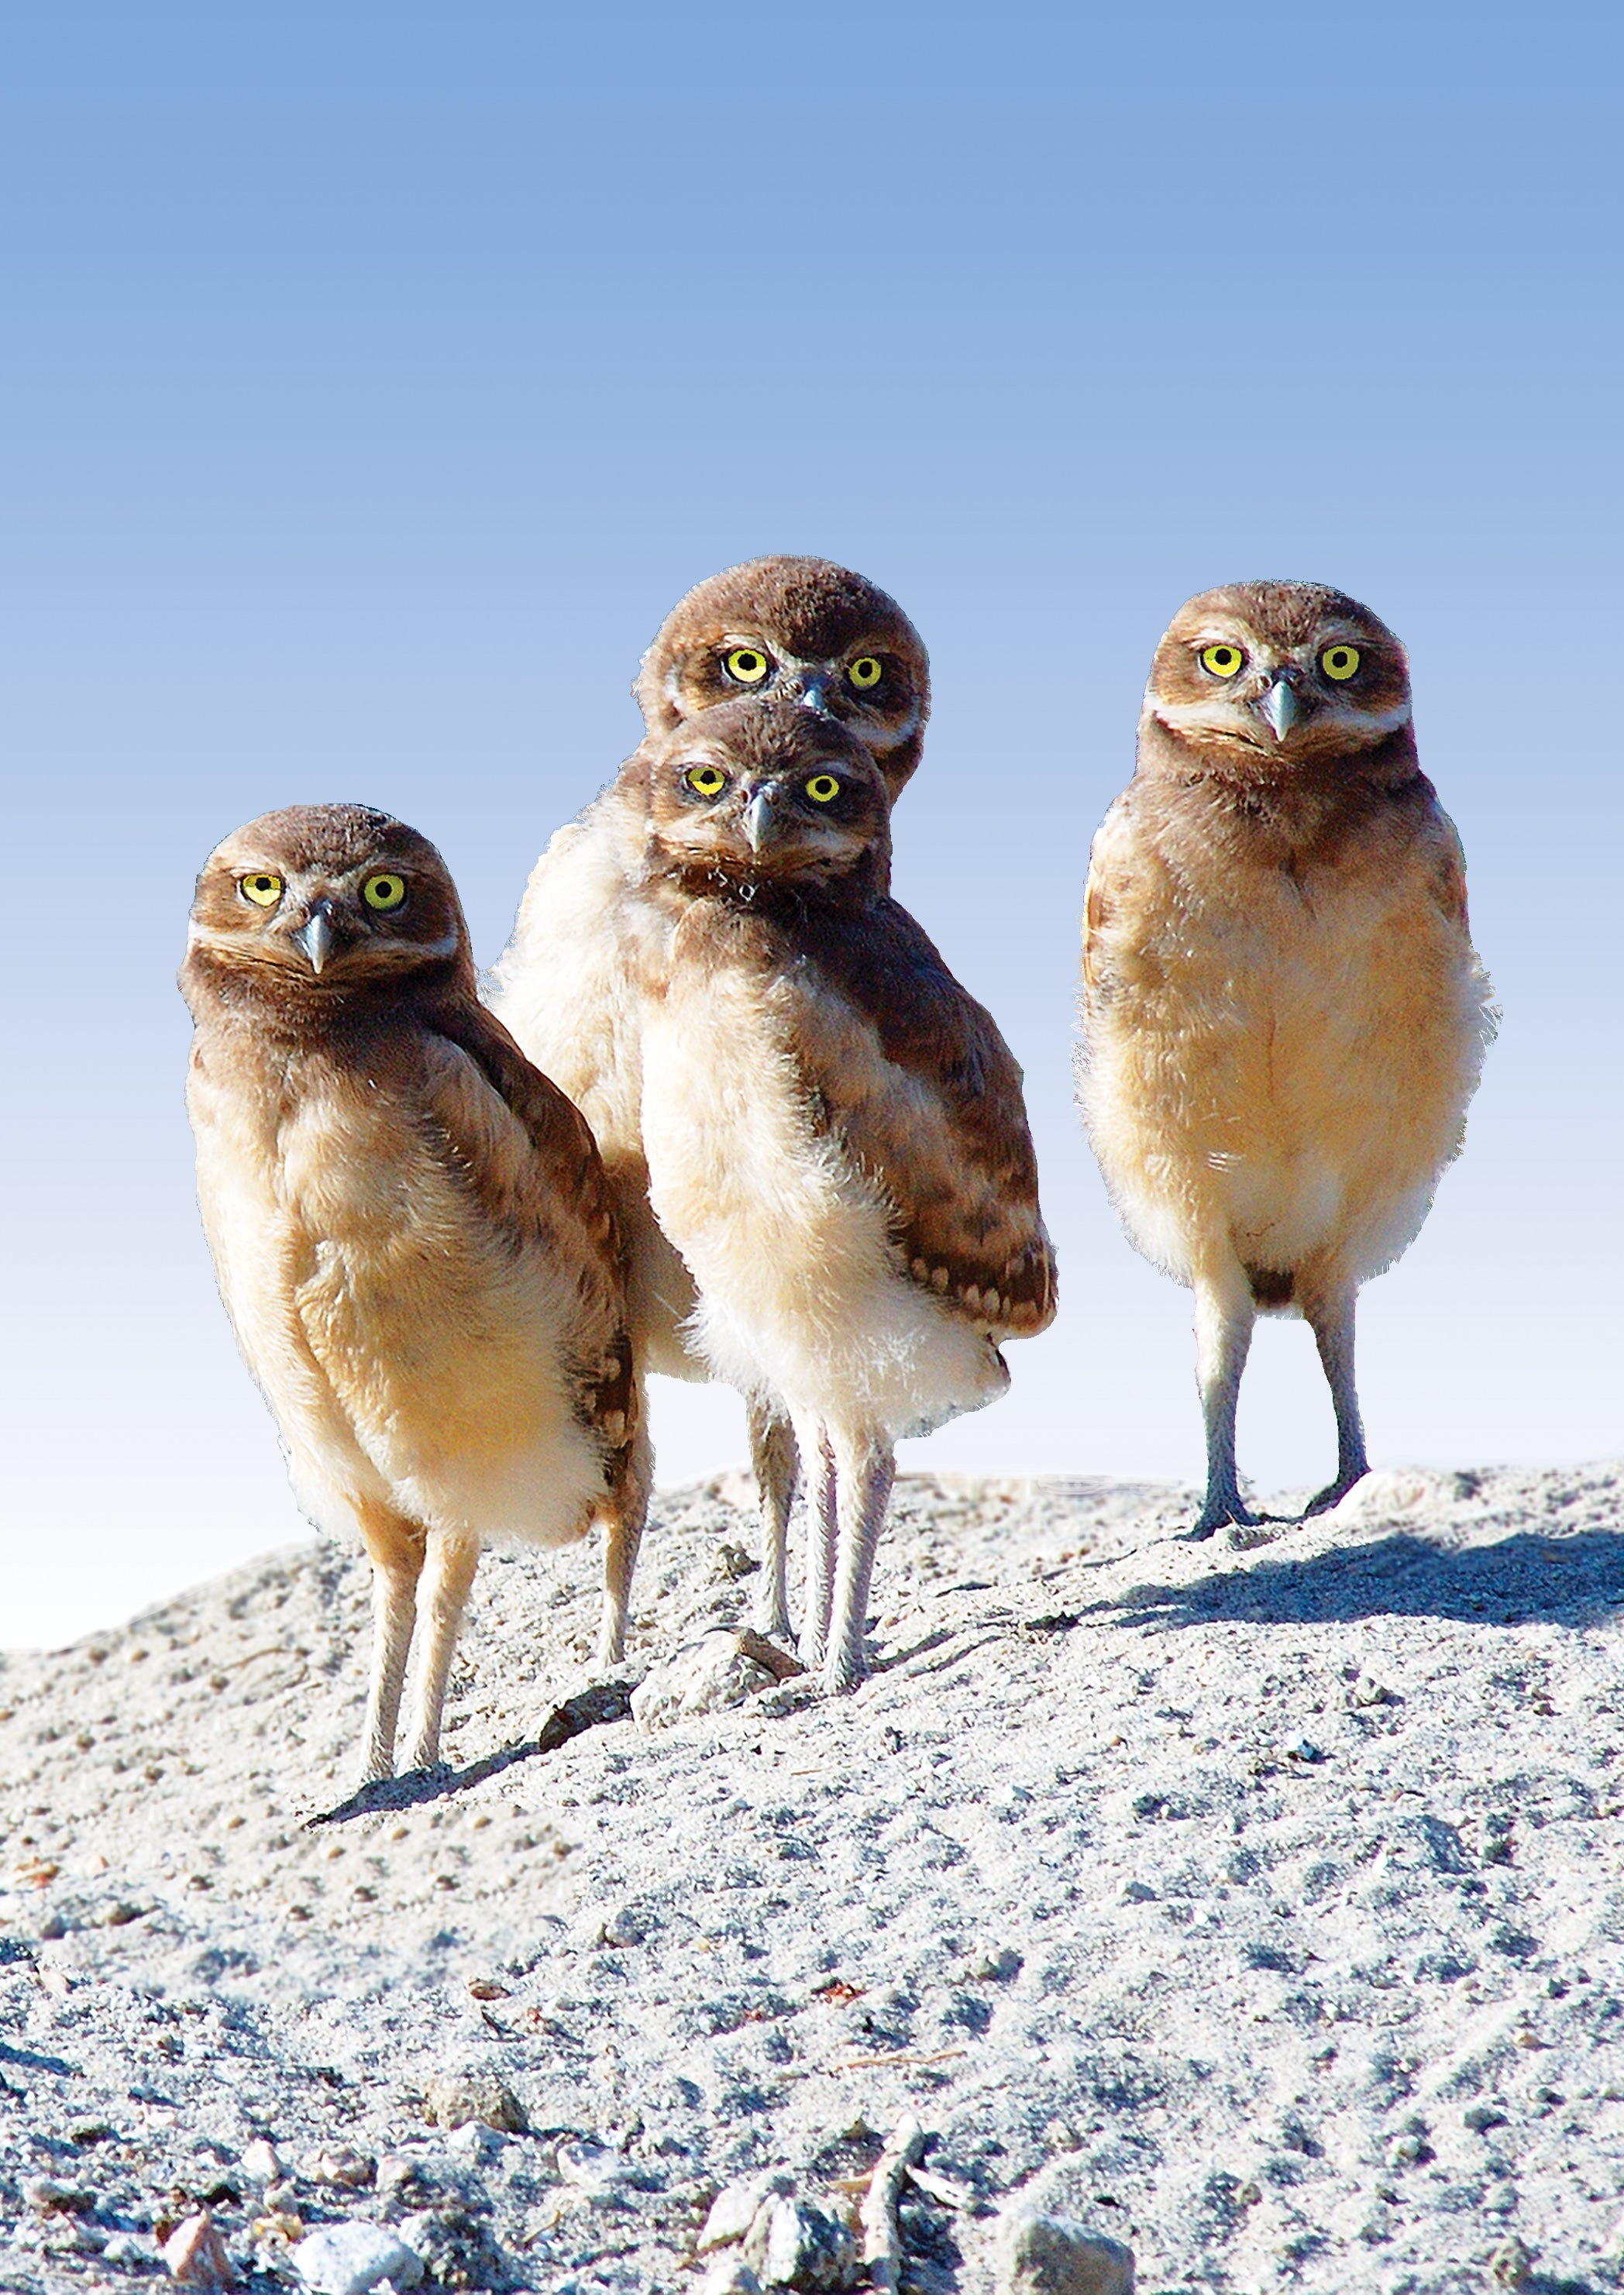 Burrowing owls find their own way to stay cool in California desert